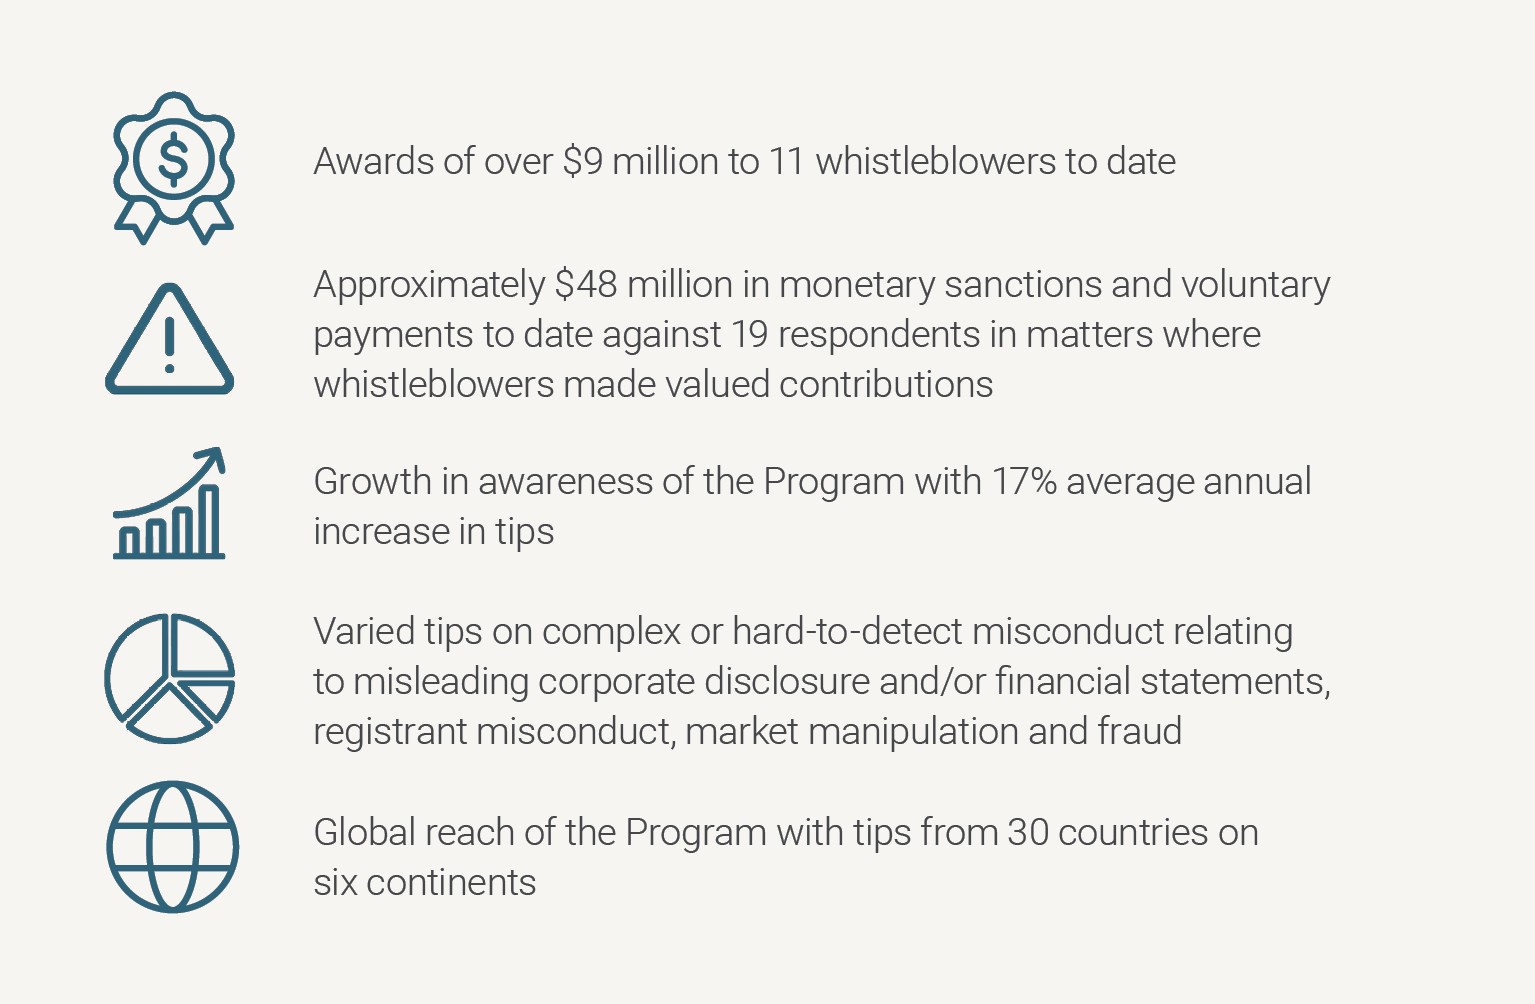 A list of five highlights of the OSC Whistleblower Program. The first highlight is: “Awards of over $9 million to 11 whistleblowers to date”. The second highlight is: “Approximately $48 million in monetary sanctions and voluntary payments to date against 19 respondents in matters where whistleblowers made valued contributions”. The third highlight is: “Growth in awareness of the Program with 17% average annual increase in tips”. The fourth highlight is: “Varied tips on complex or hard-to-detect misconduct r